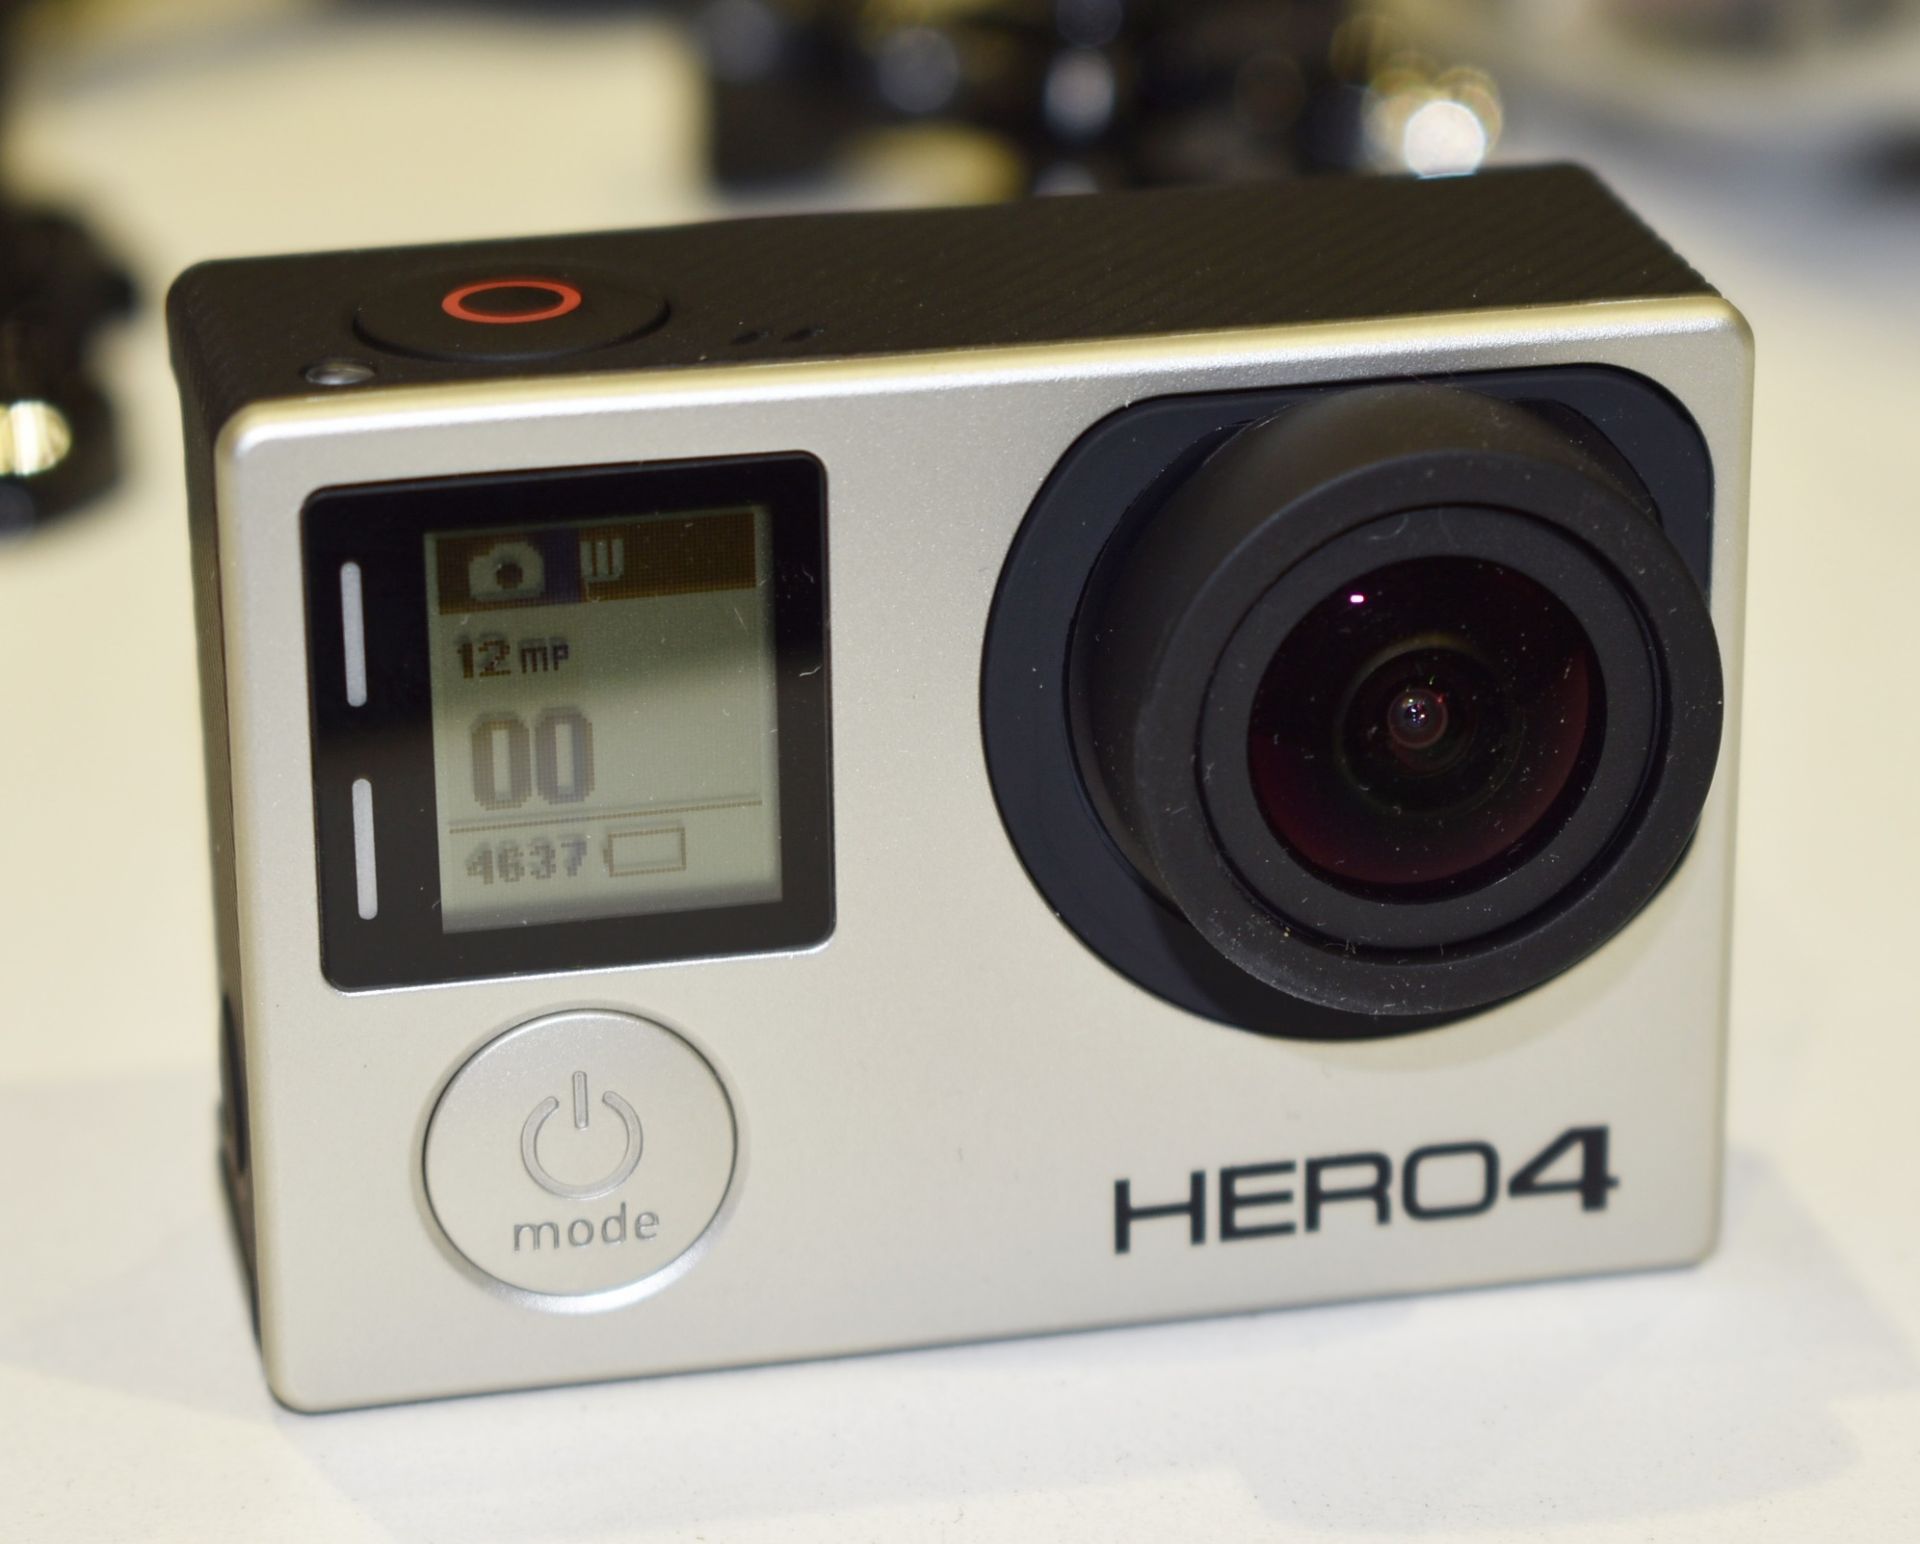 1 x Go Pro Hero 4 Action Video Camera - Full HD 12mp 4k Video Recorder - Includes 32gb SD Memory - Image 8 of 12